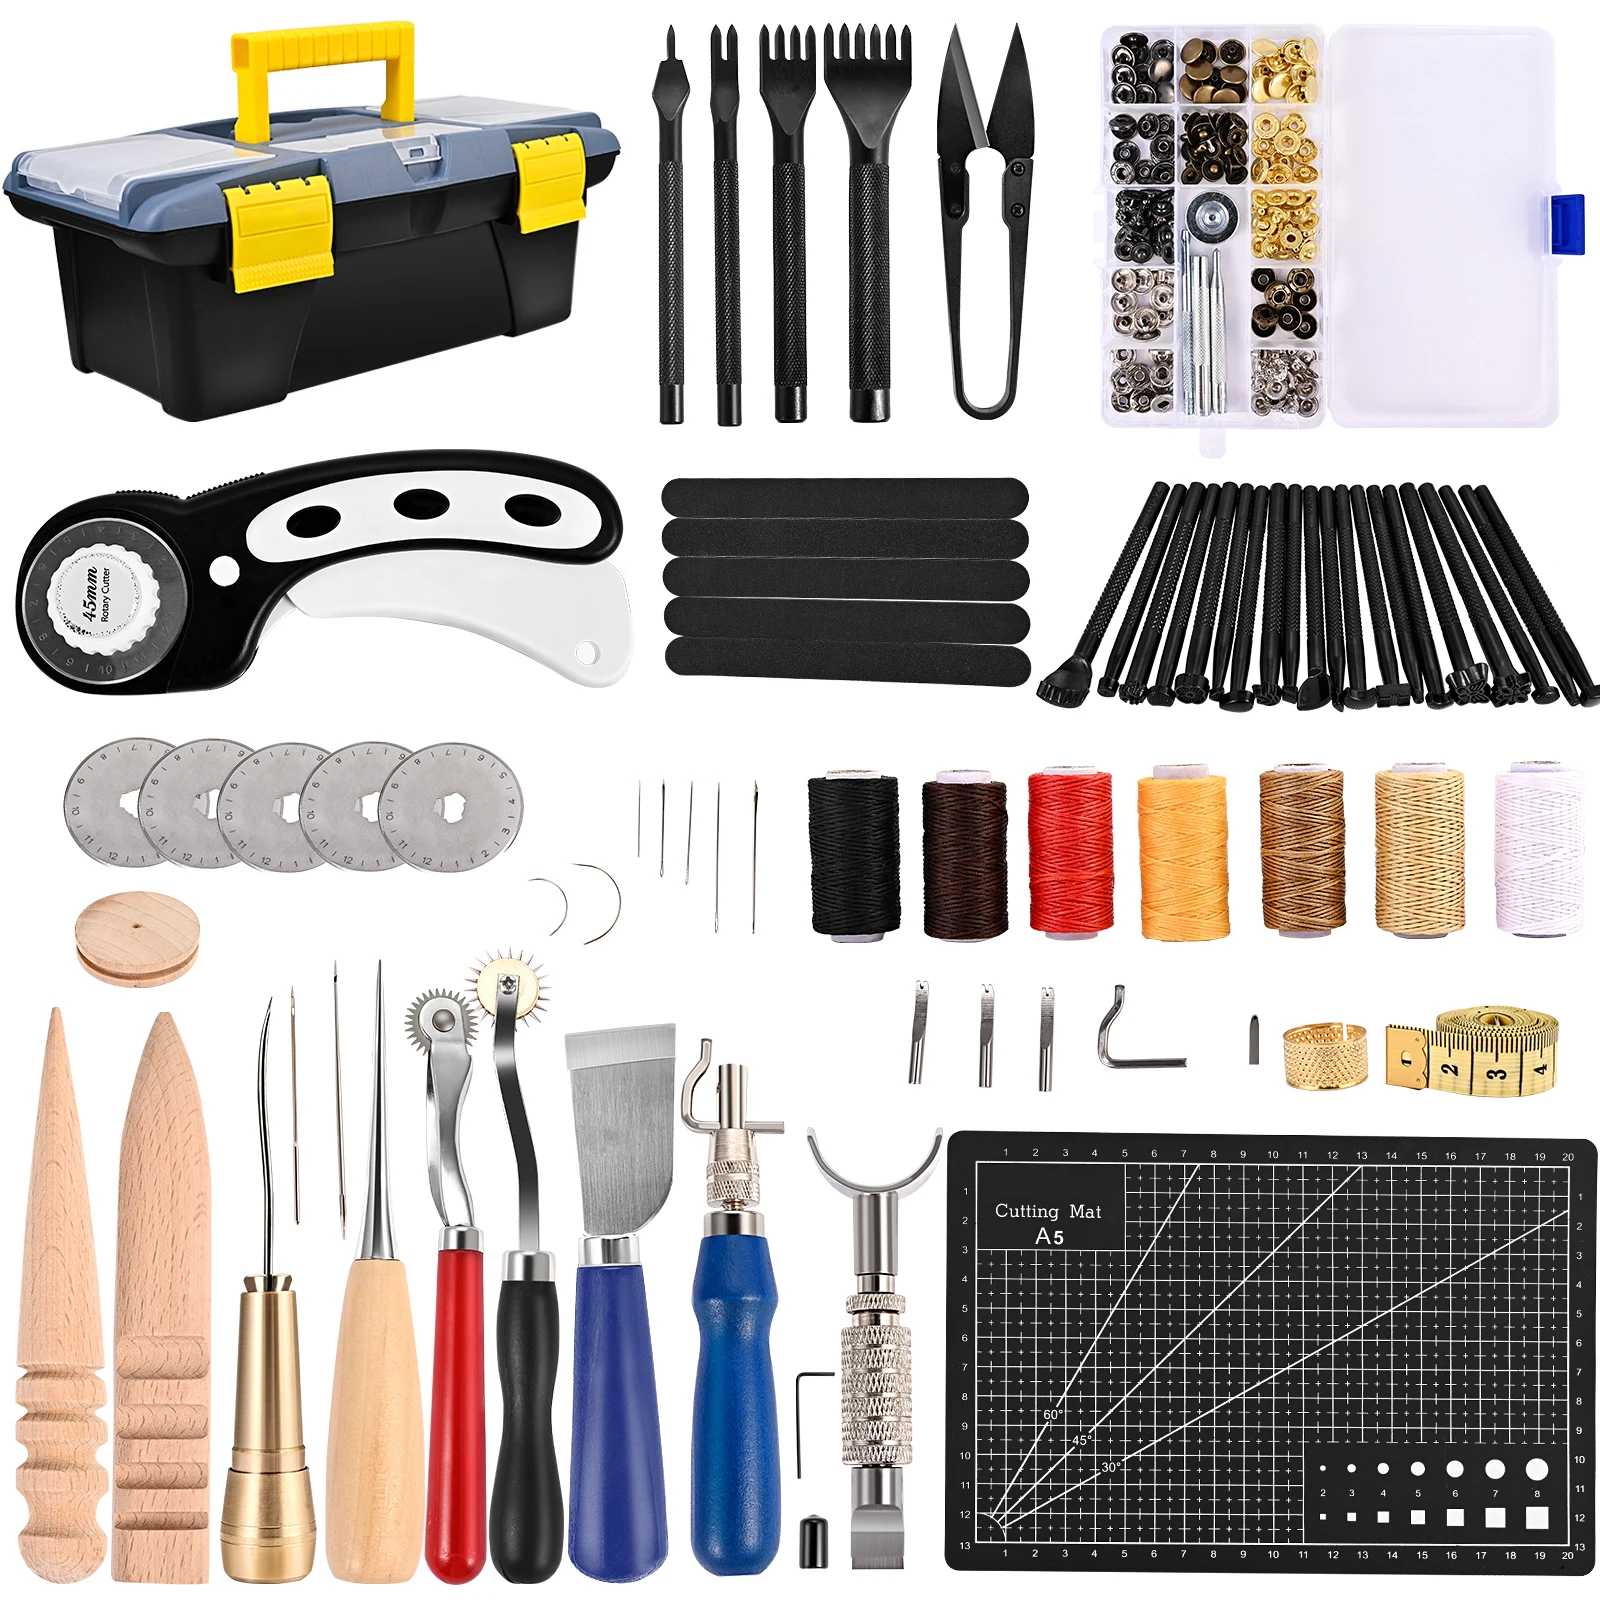 

366pcs/set Professional Leather Craft Tools Kit Home Hand Sewing Stitching Punch Carving Work Saddle Leathercraft Accessories